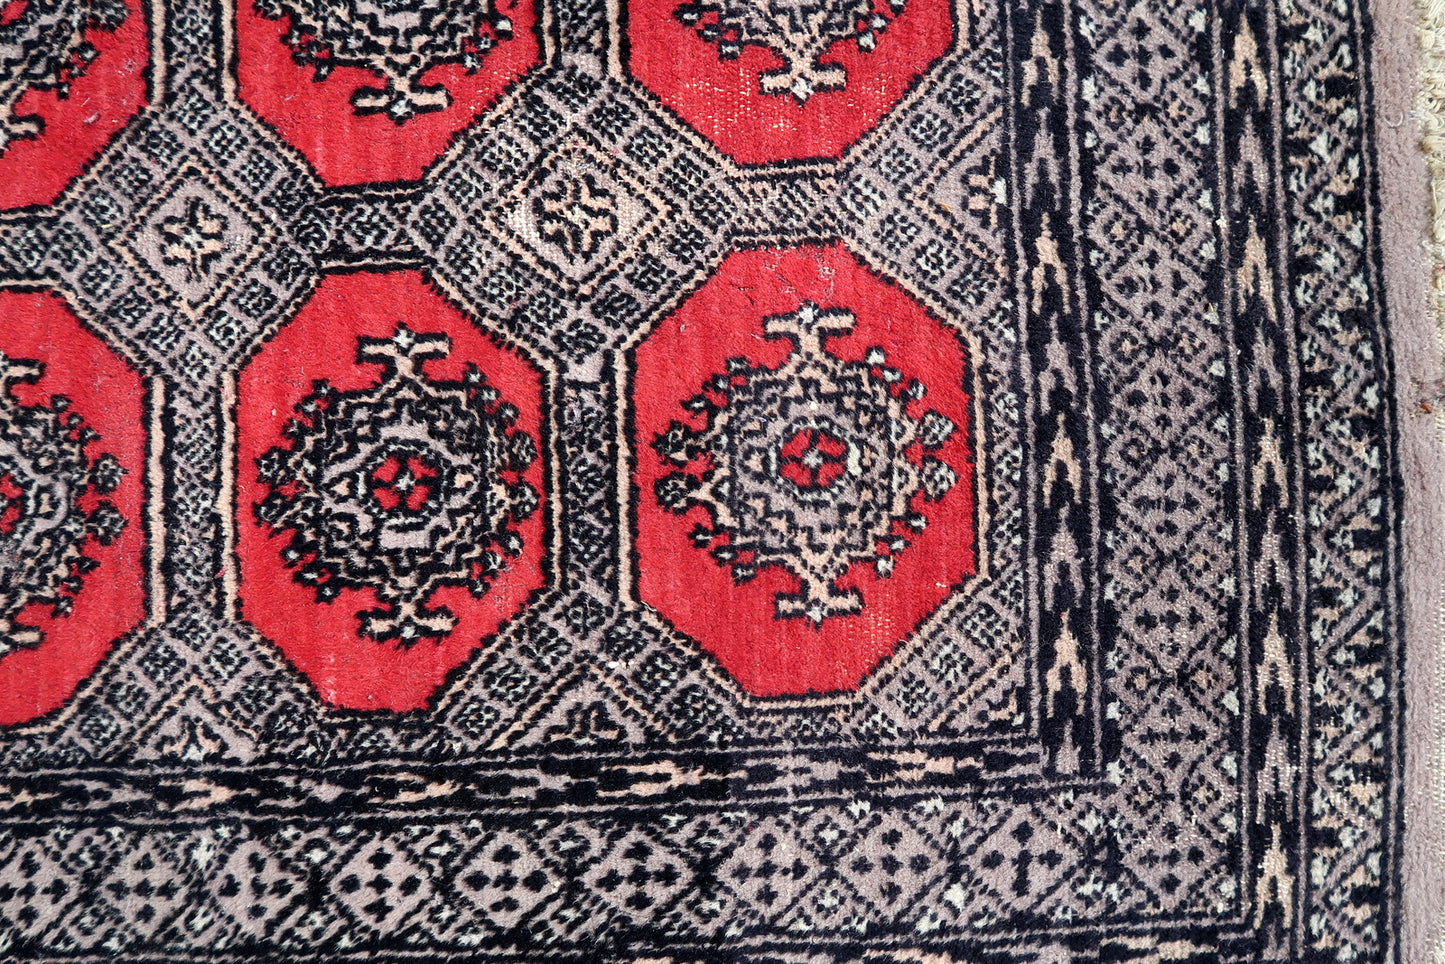 Handmade vintage Uzbek Bukhara rug in traditional design and red color. The rug is from the end of 20th century in original condition, it has some low pile.